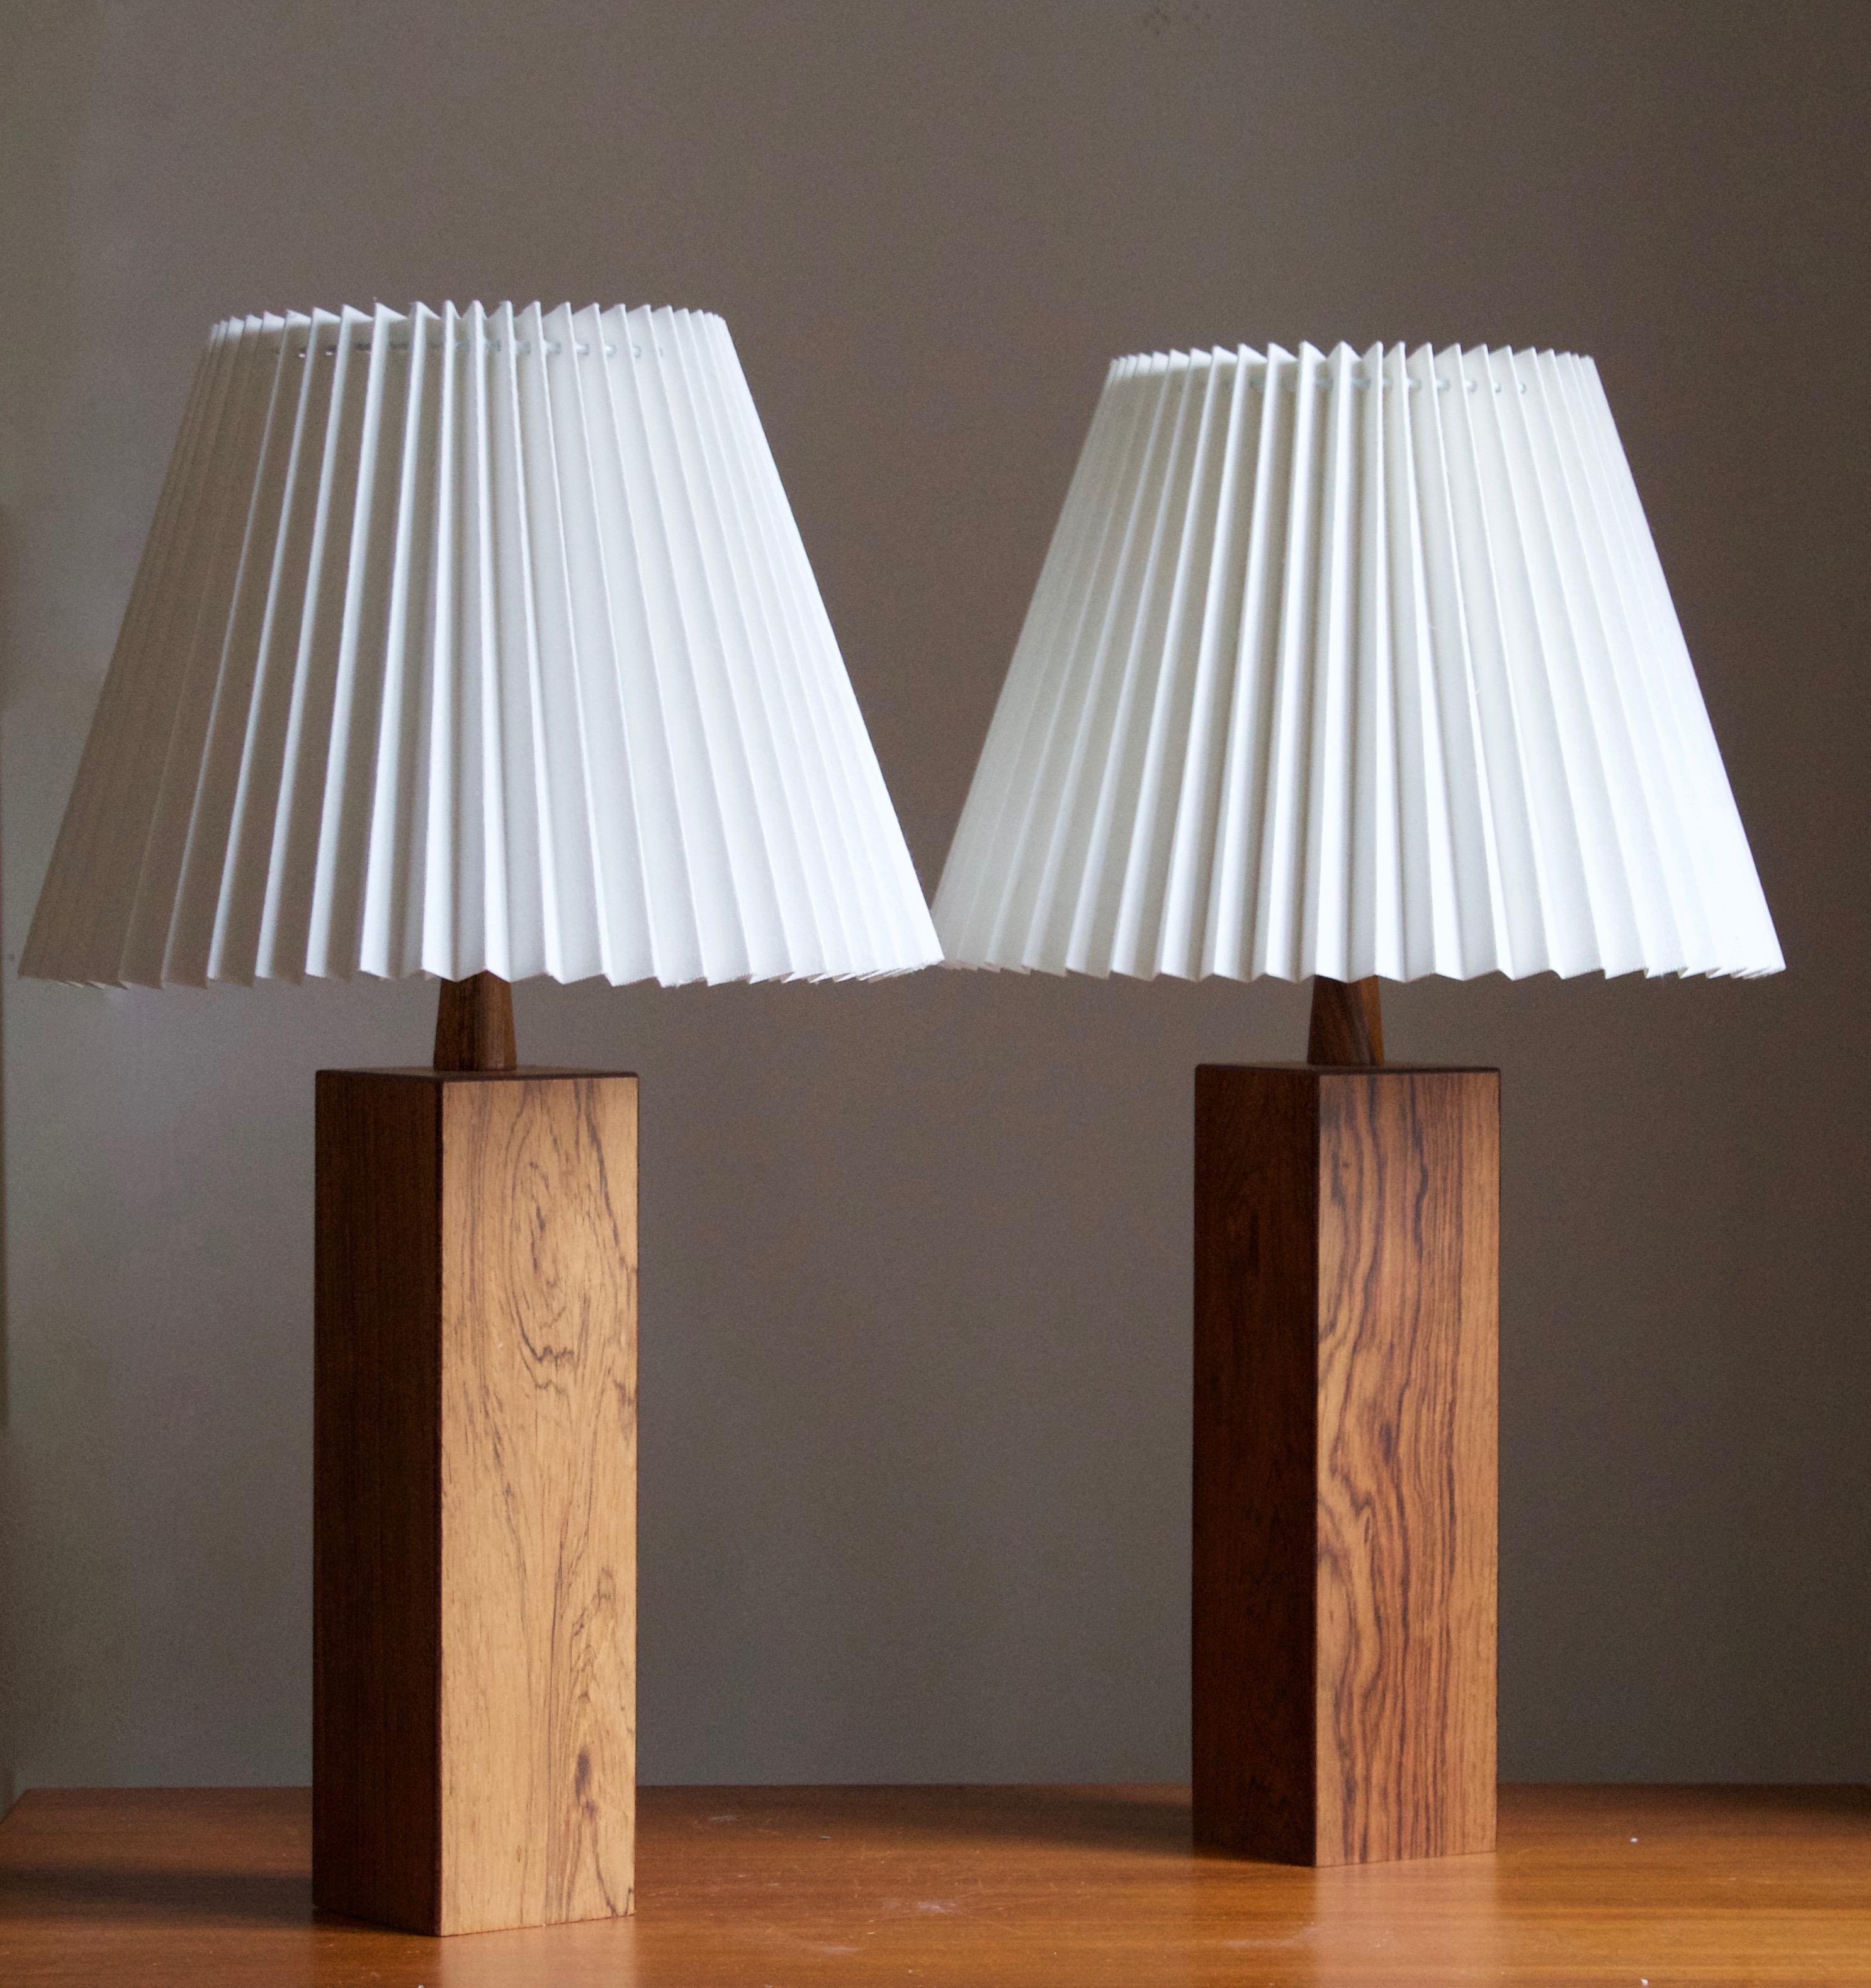 A pair of sizable rosewood table lamp, designed and produced in Sweden, c. 1950s-1960s. 

Stated dimensions exclude lampshade. Height includes socket. Sold without lampshade.